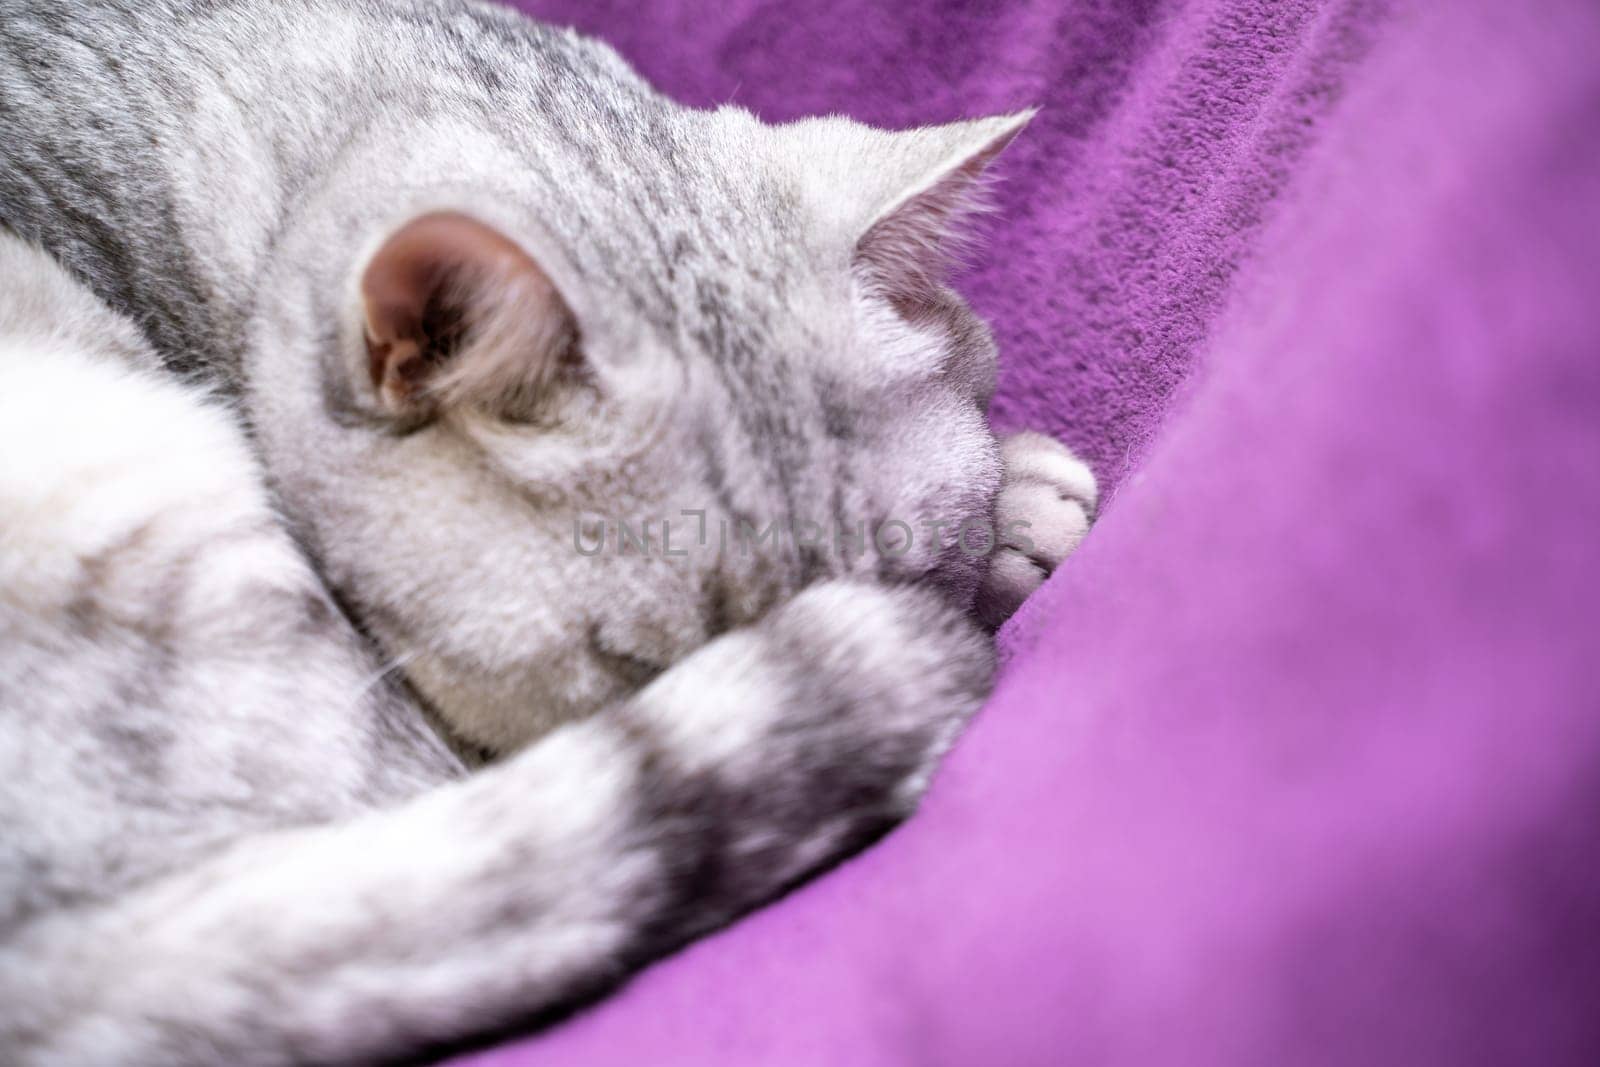 scottish straight cat is sleeping. Close-up of a sleeping cat muzzle, eyes closed. Against the background of a purple blanket. Favorite Pets, cat food. by Matiunina